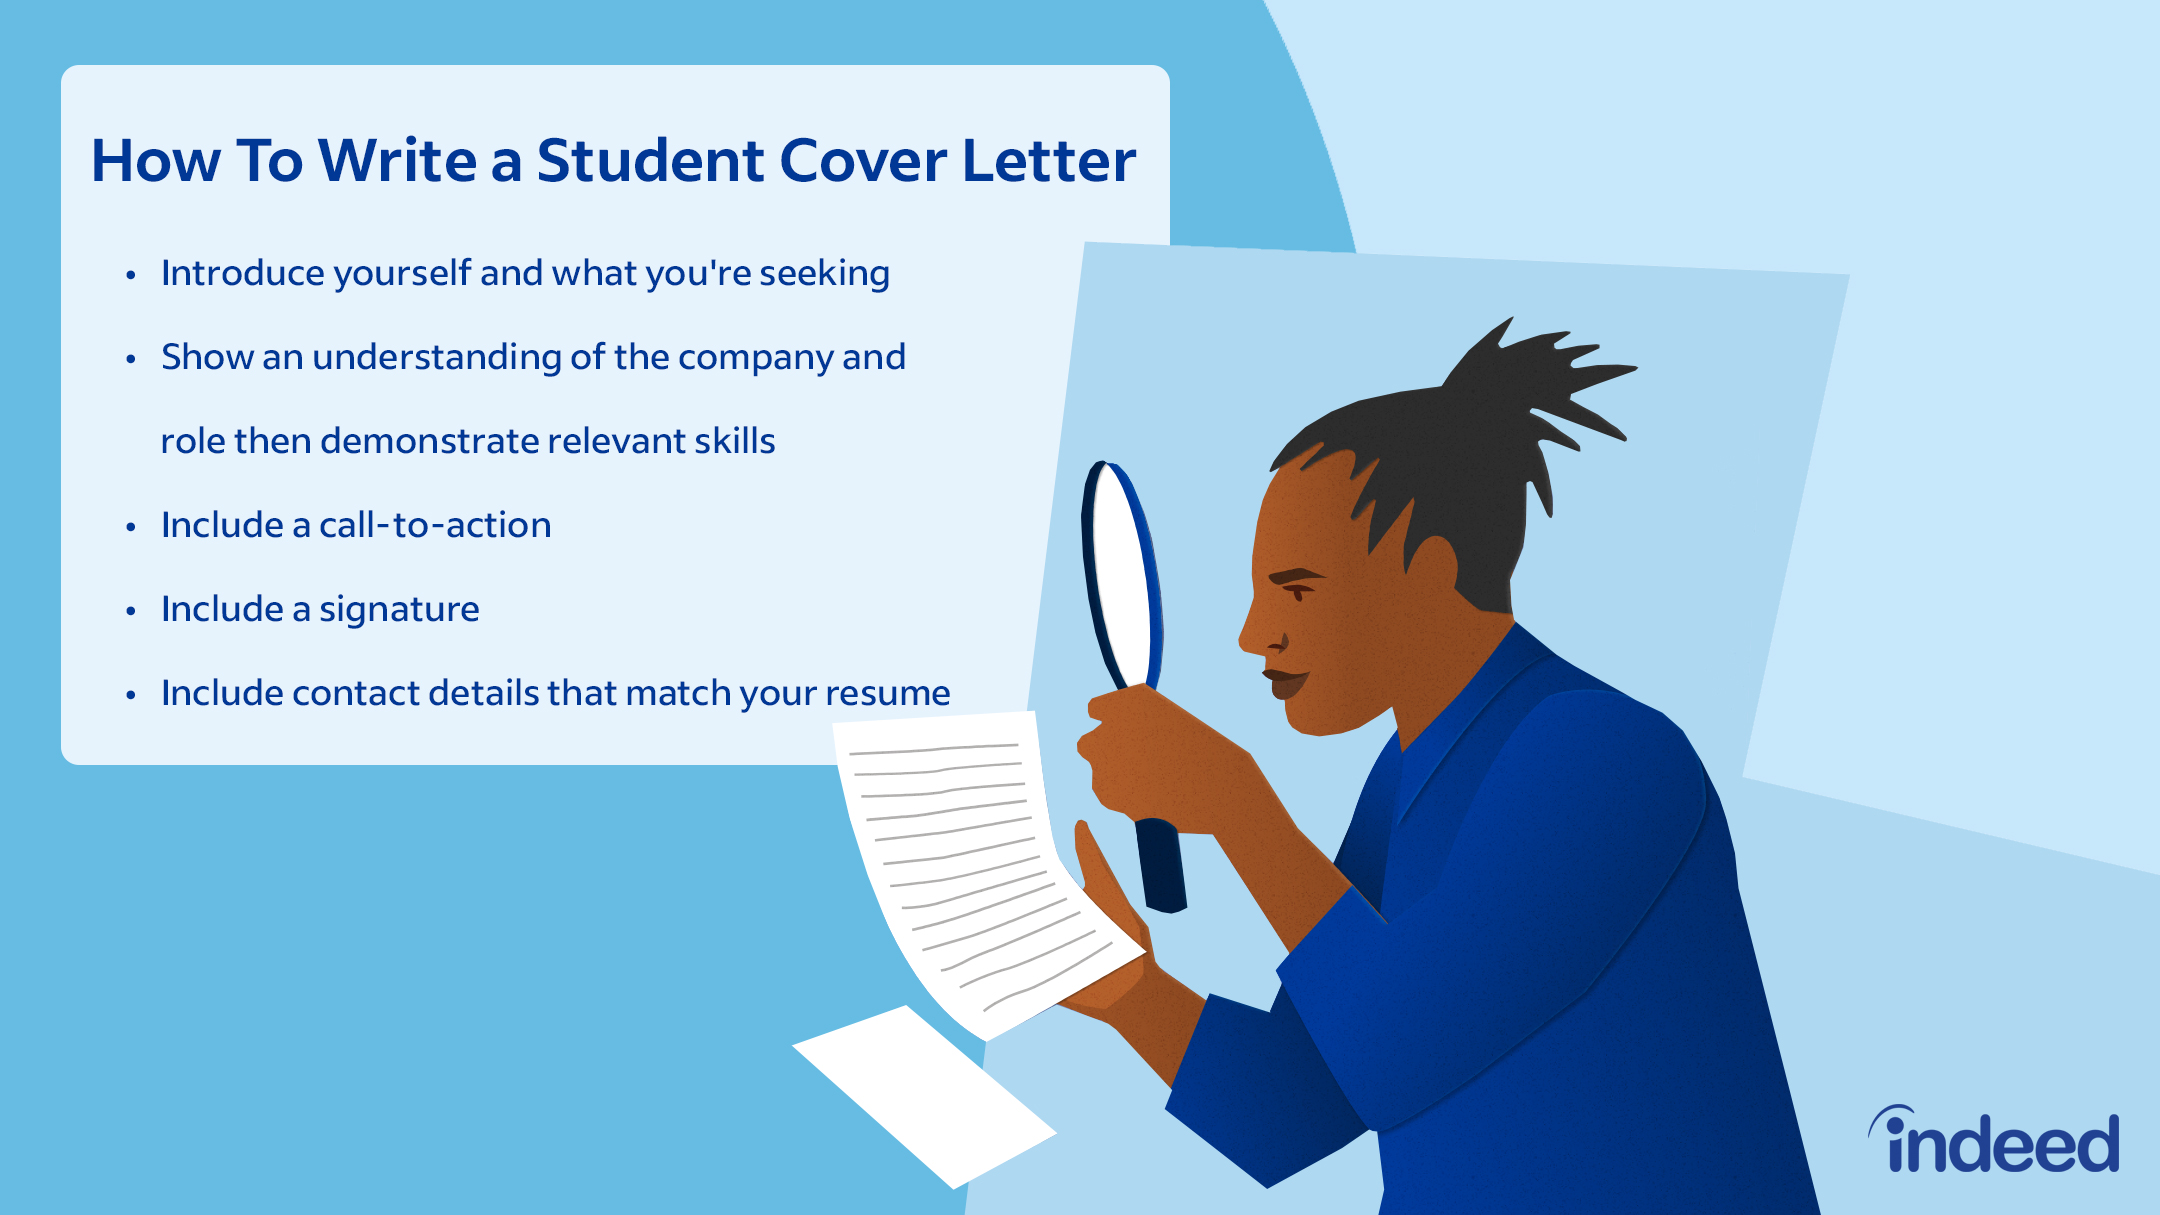 Recent Graduate Cover Letter Example & Writing Tips